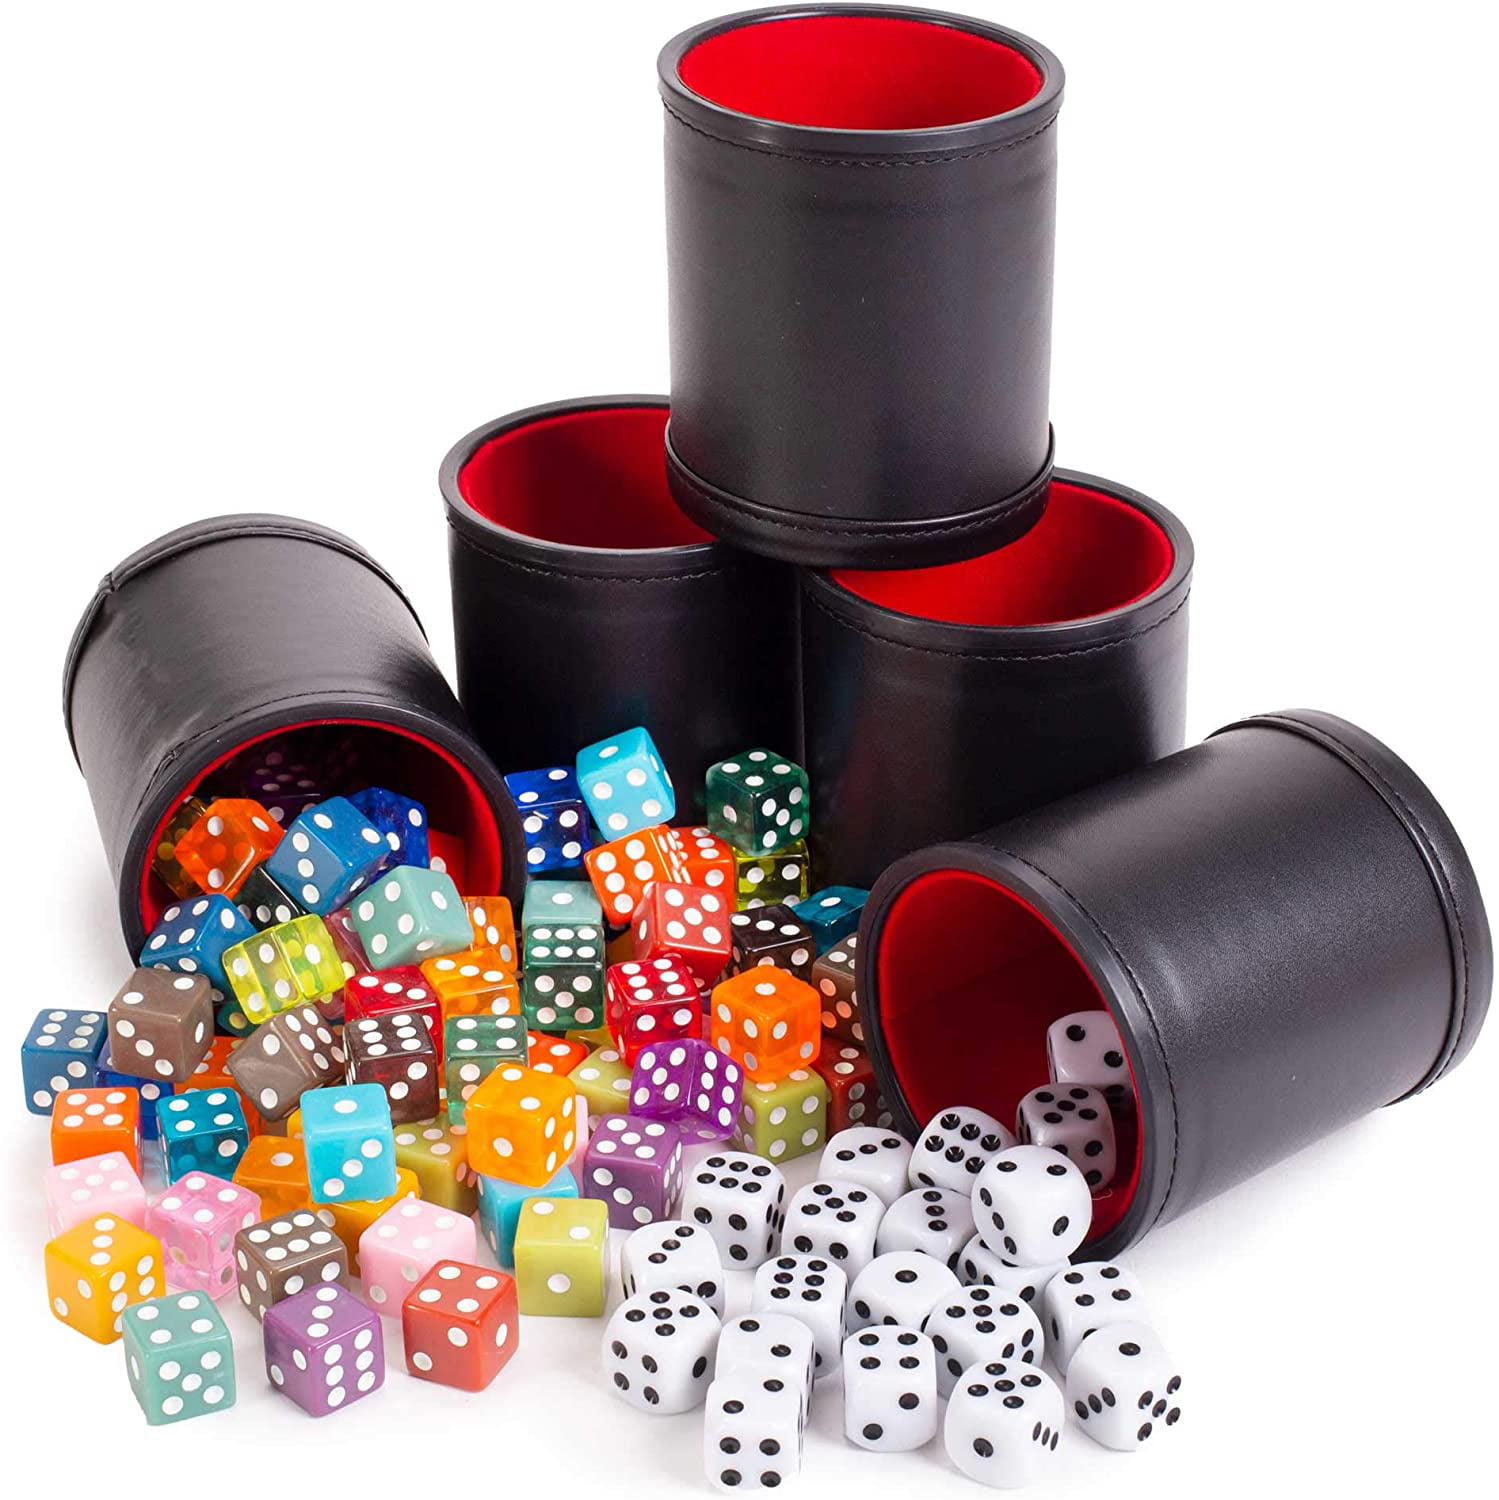 New Leather Poker Cup With 5 Dice Common Casino Tools KTV Bar Drinking Toy Hot 